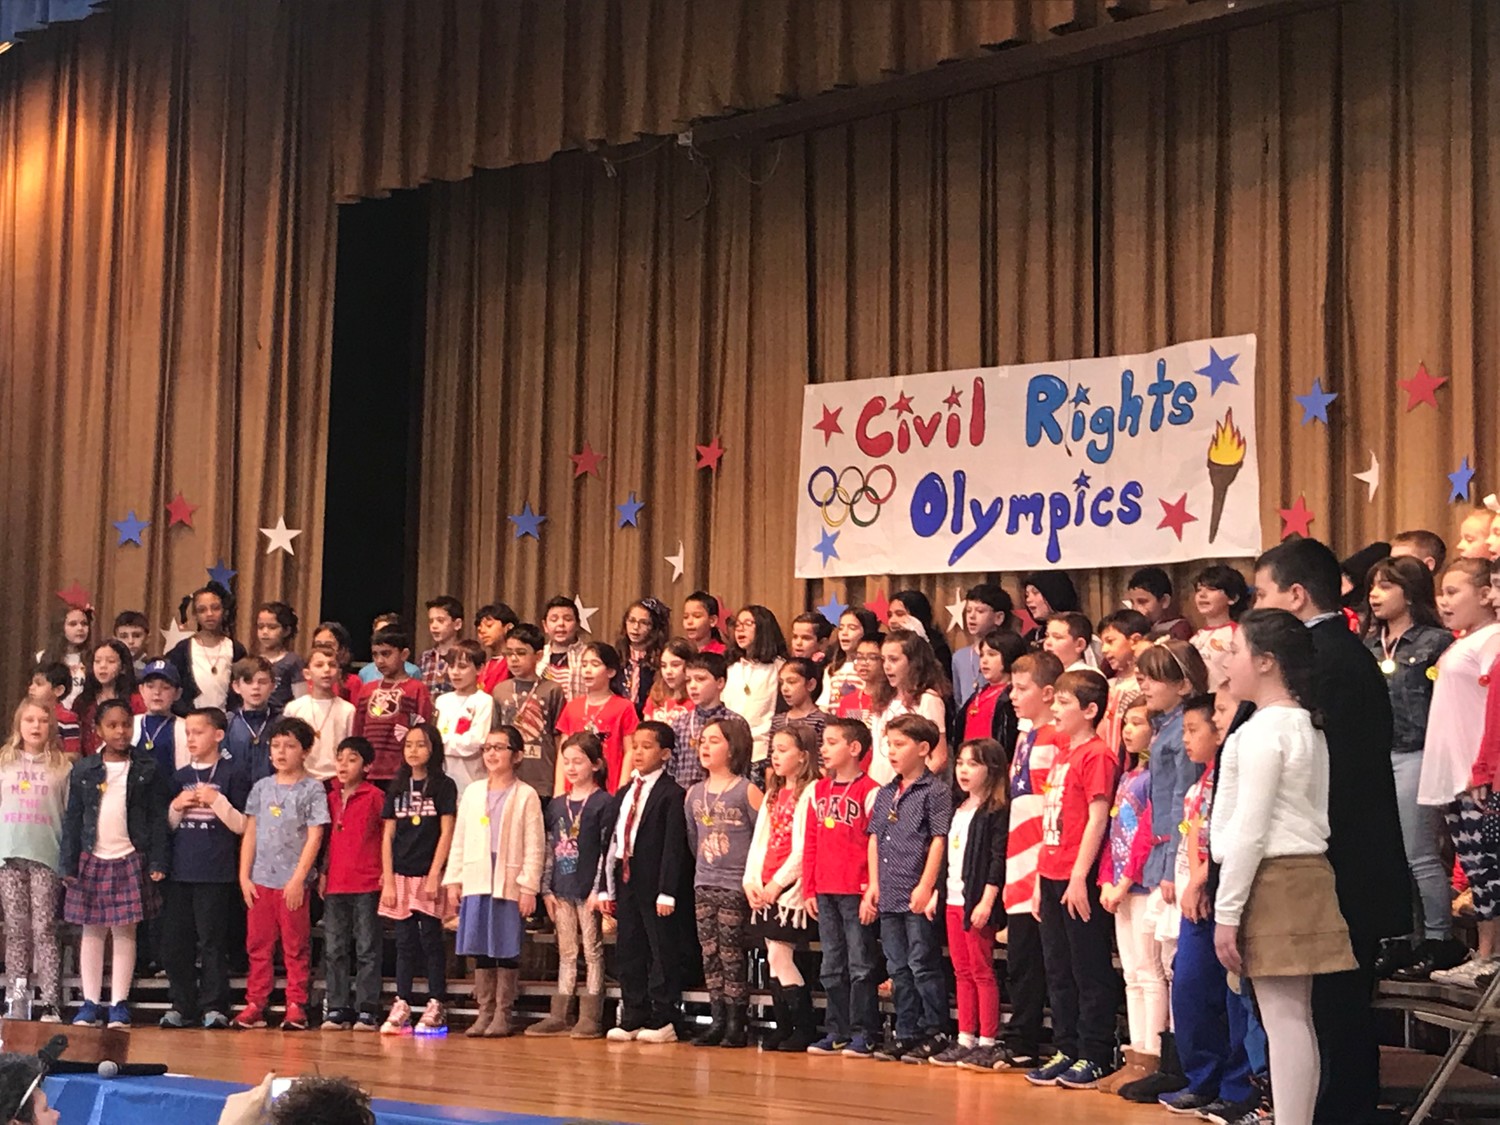 Marion Street School third-graders performed songs and skits in the Civil Rights Olympics, and presented visitor Joseph McNeil with a gold medal at the end of their performance. McNeil was part of the Greensboro, N.C. sit-ins at Woolworth’s, in protest of segregation in 1960